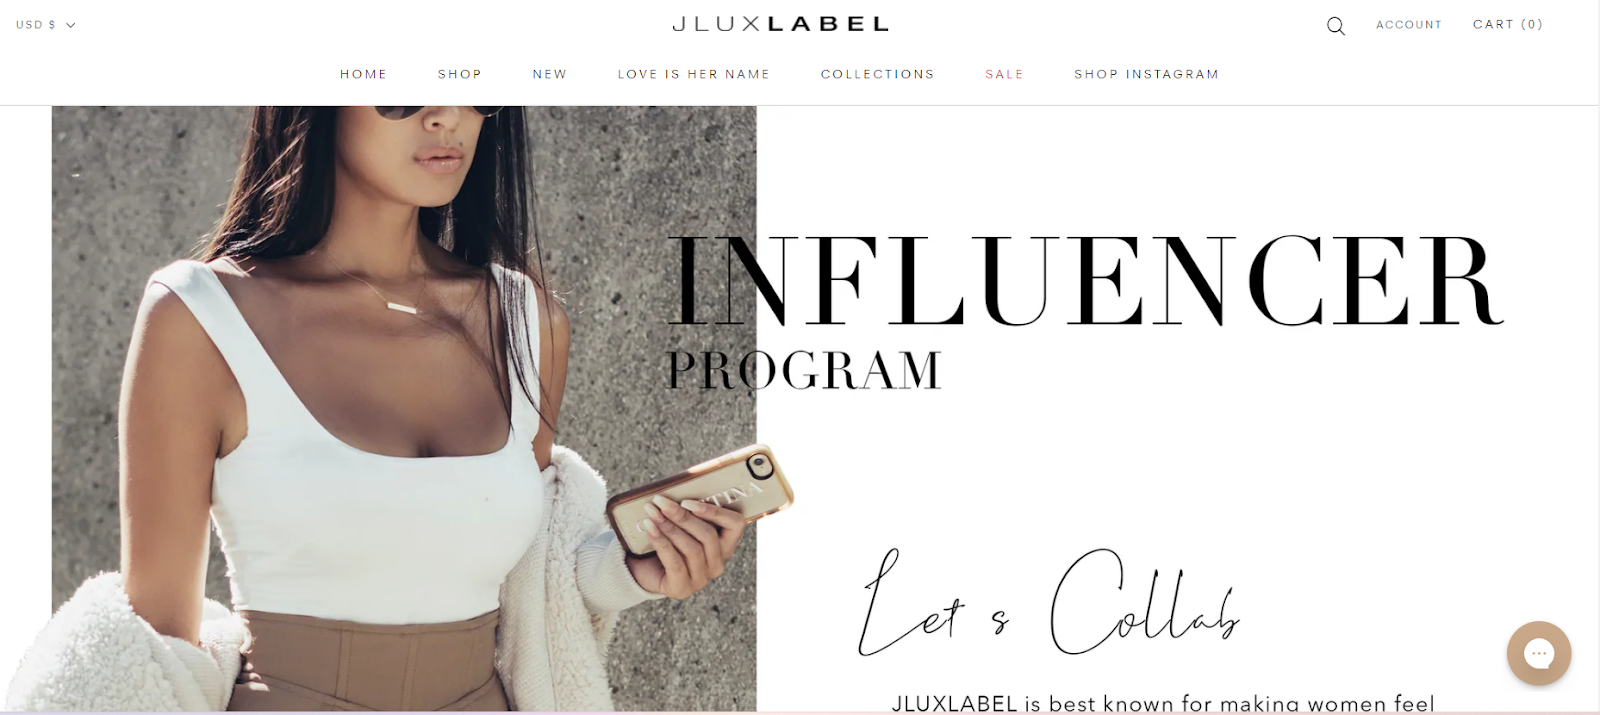 All About The Jluxlabel Influencer Program